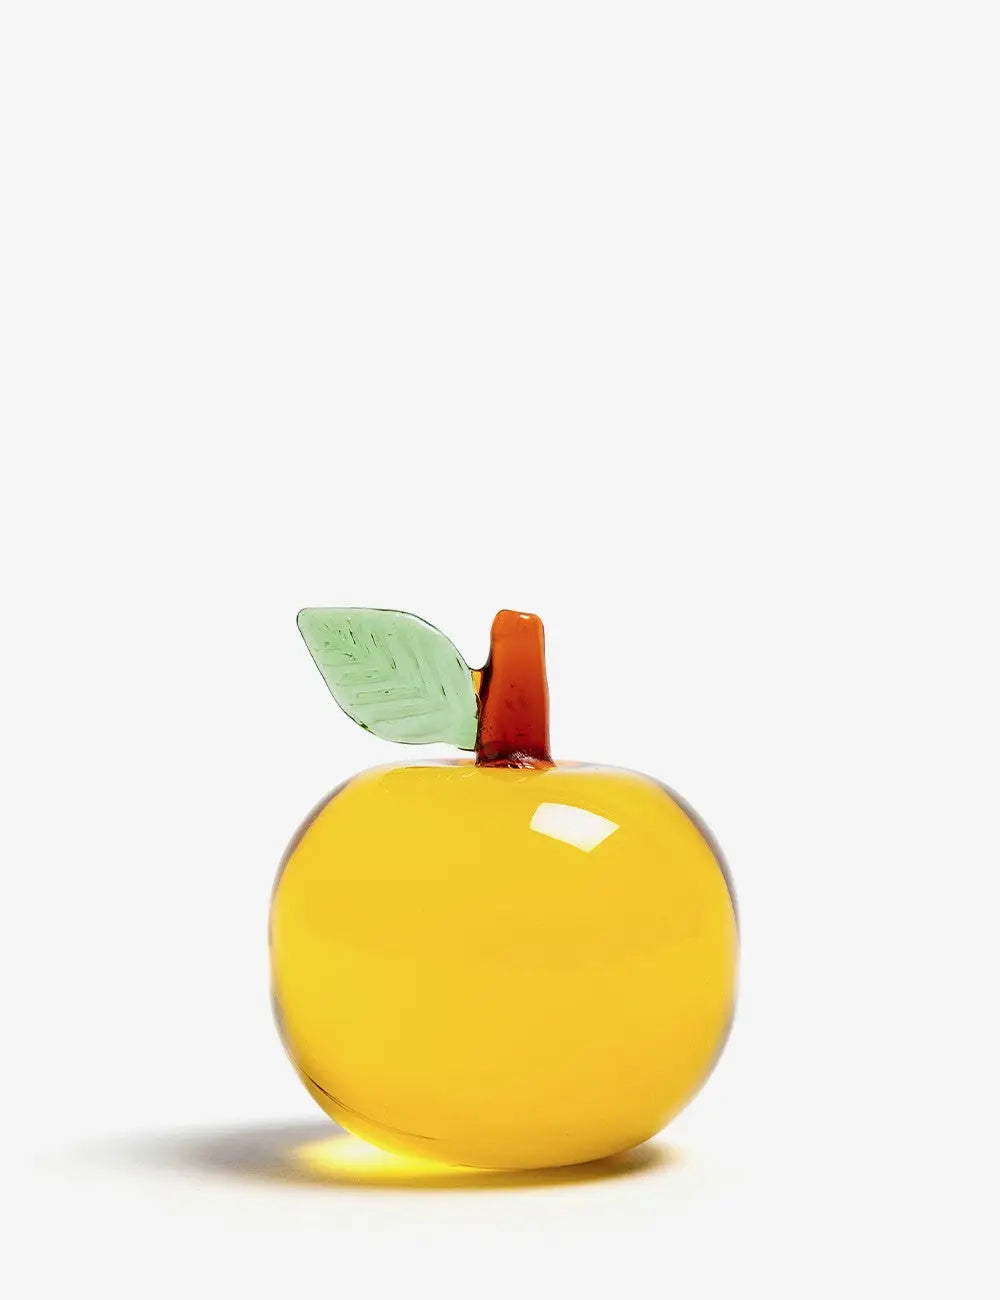 Pears & Apples paper weights X KLUSIVE STORE